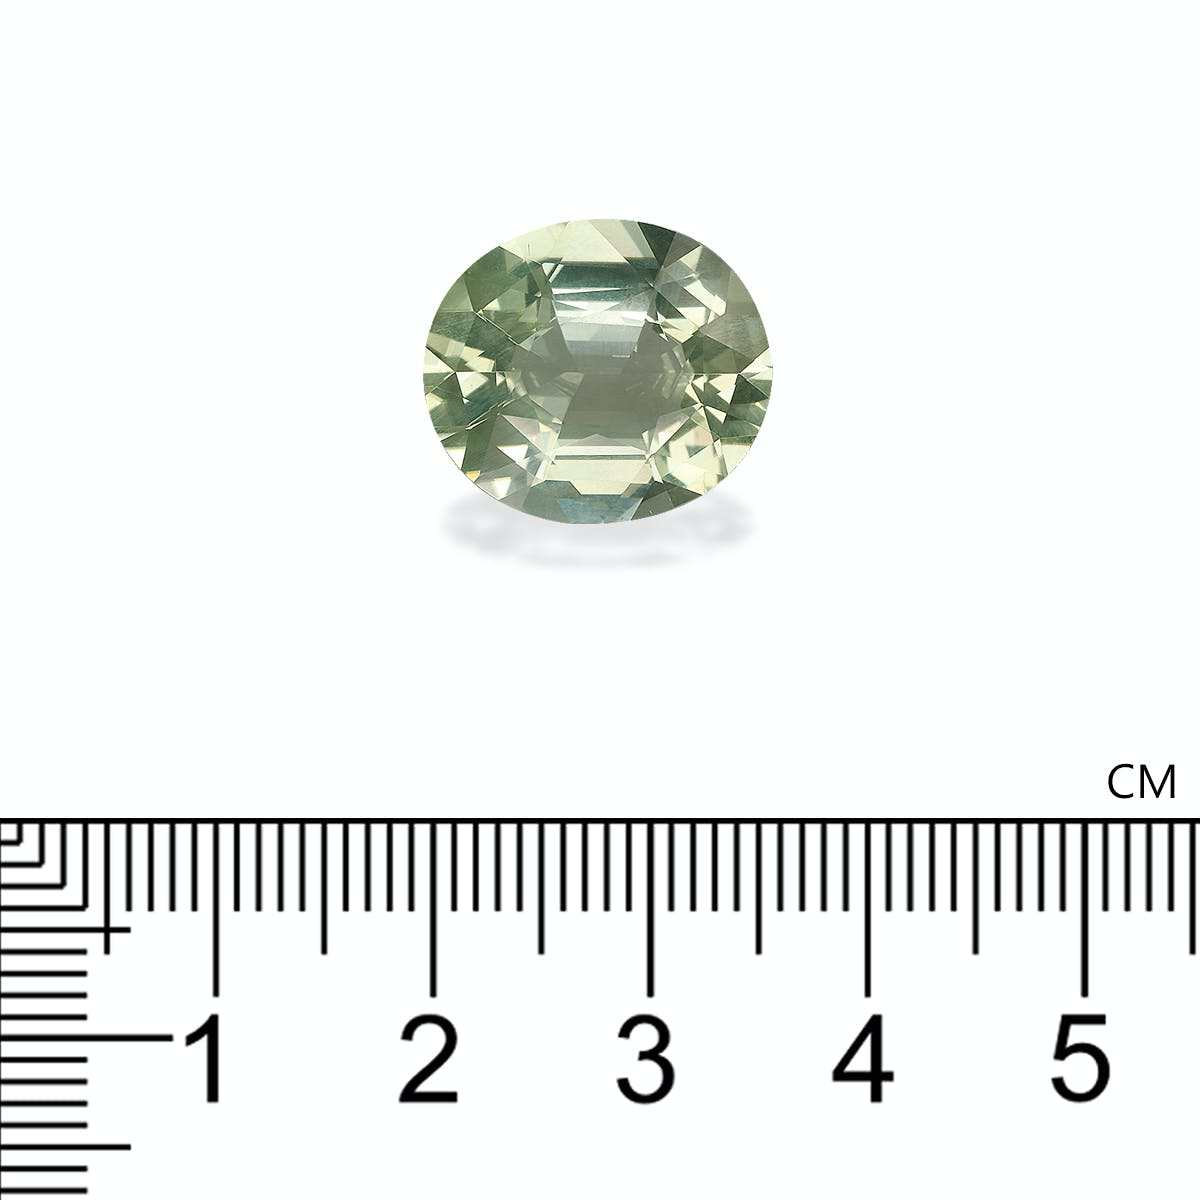 Picture of Pale Green Tourmaline 9.85ct - 16x14mm (TG0622)